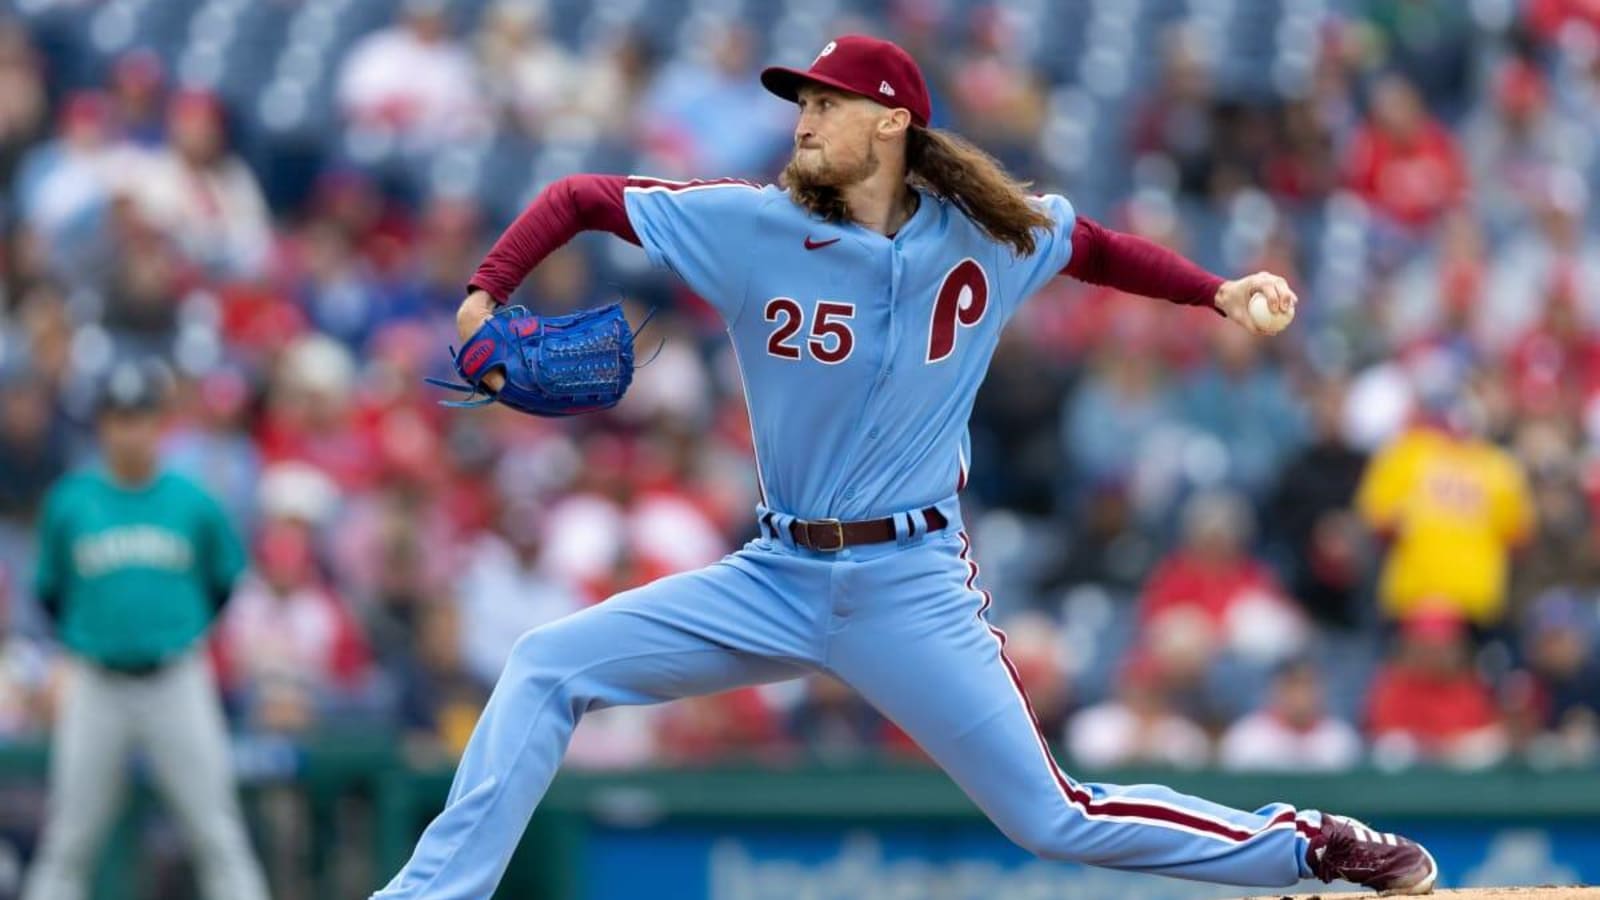 What Will the Phillies Do With Strahm When Suárez Returns?